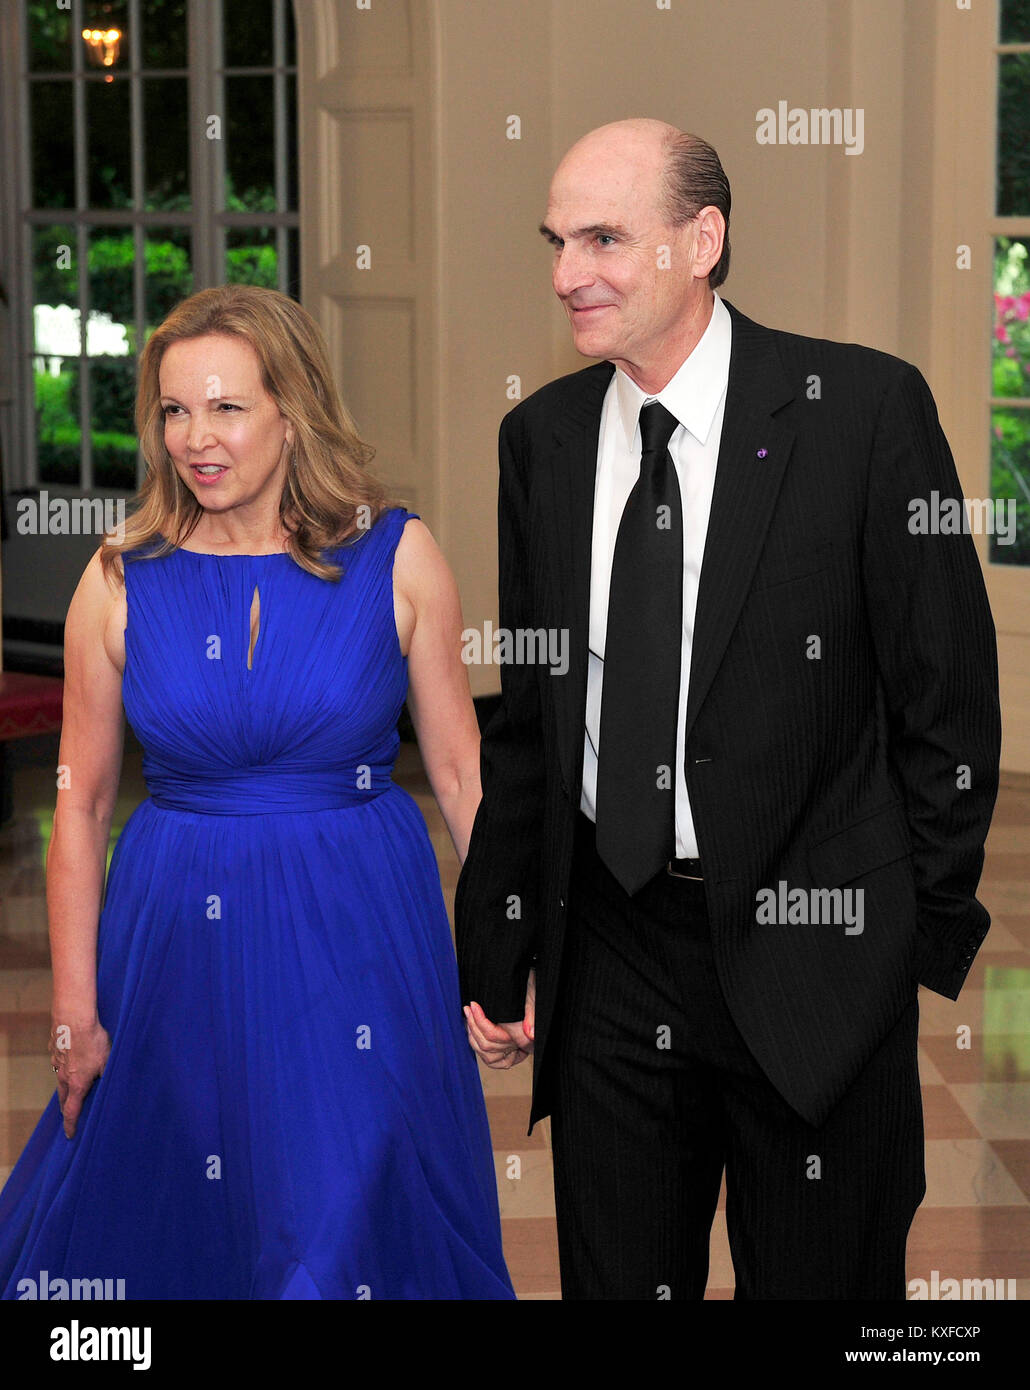 James Taylor and Caroline Taylor arrive for a State Dinner in honor of Chancellor Angela Merkel of Germany at the White House in Washington, D.C.  on Tuesday, June 7, 2011.Credit: Ron Sachs / CNP /MediaPunch Stock Photo